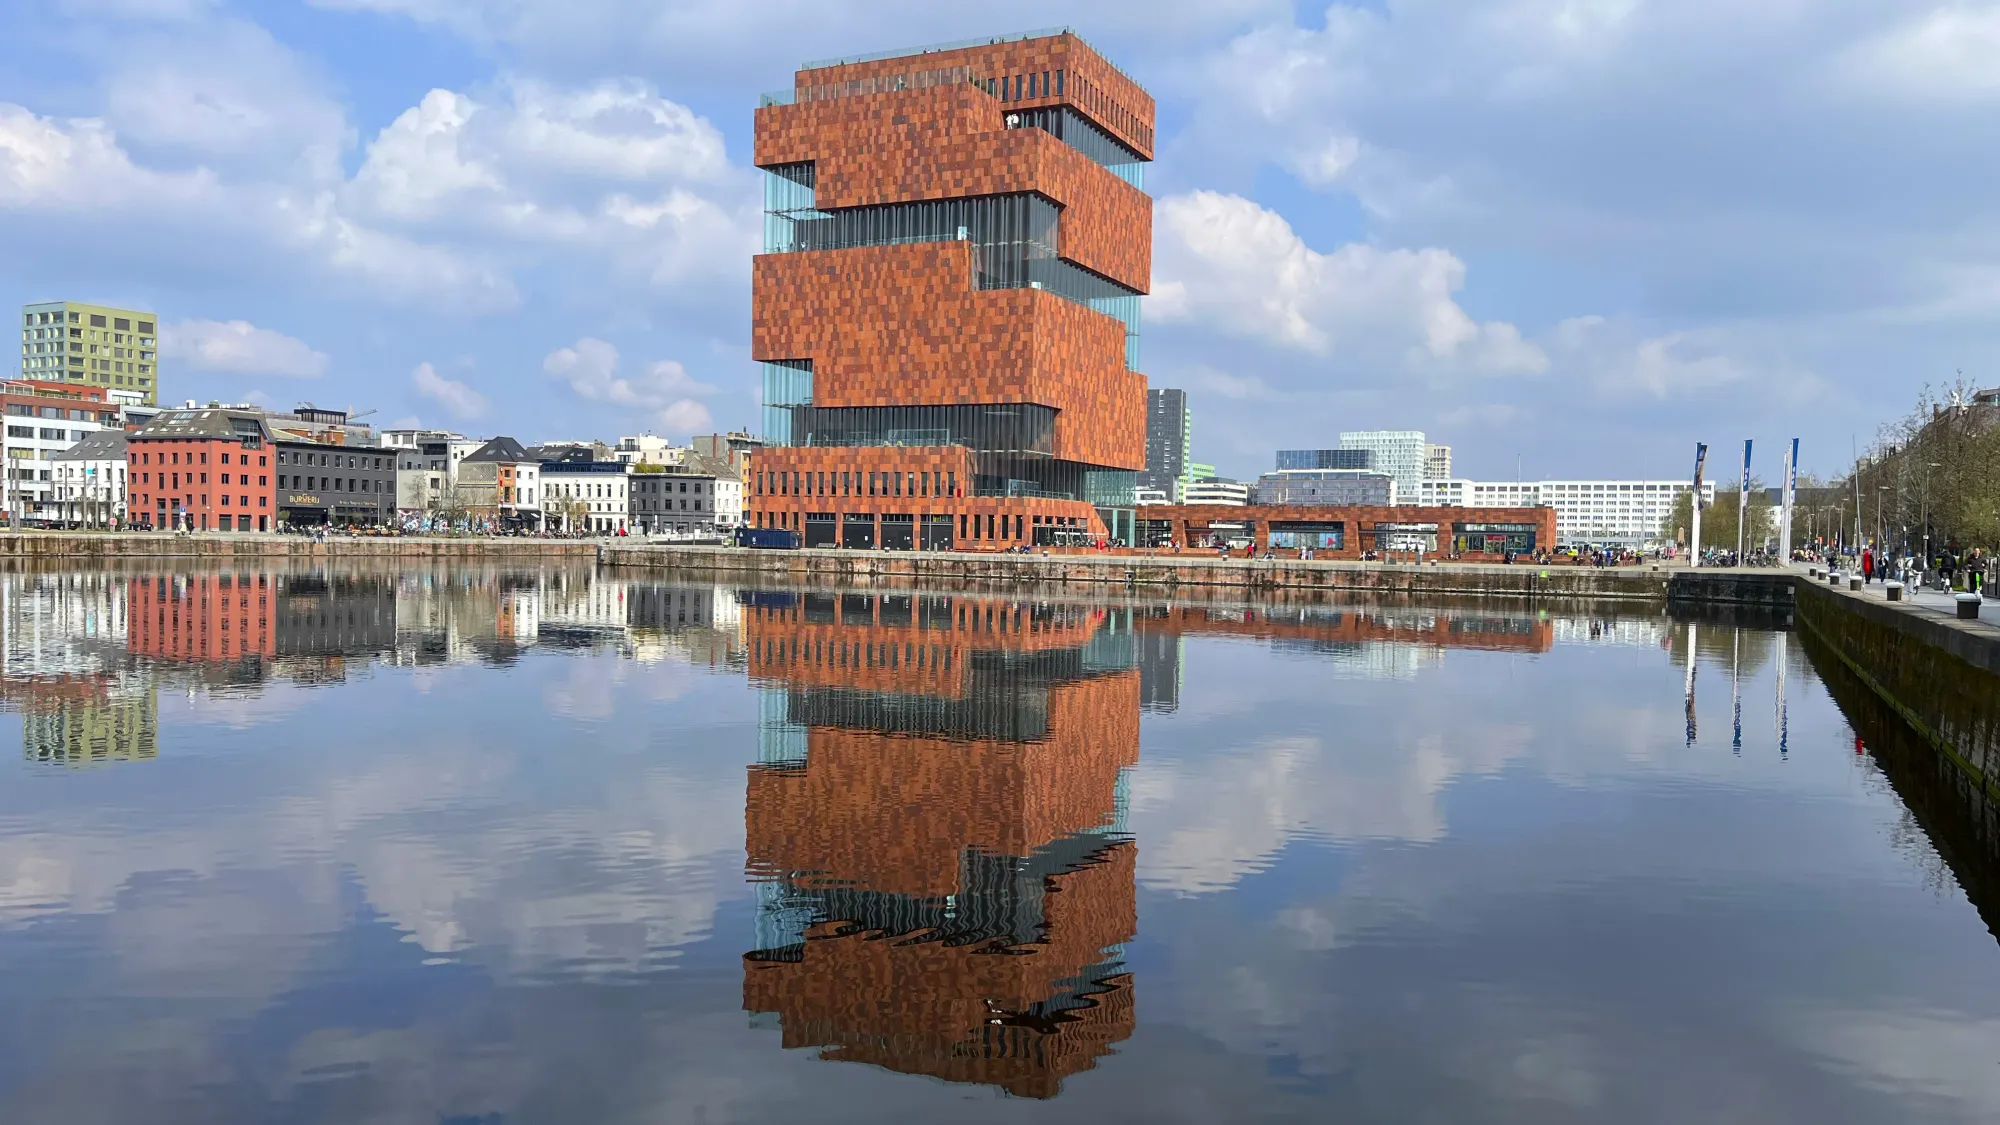 Reflection of the brick museum in the water